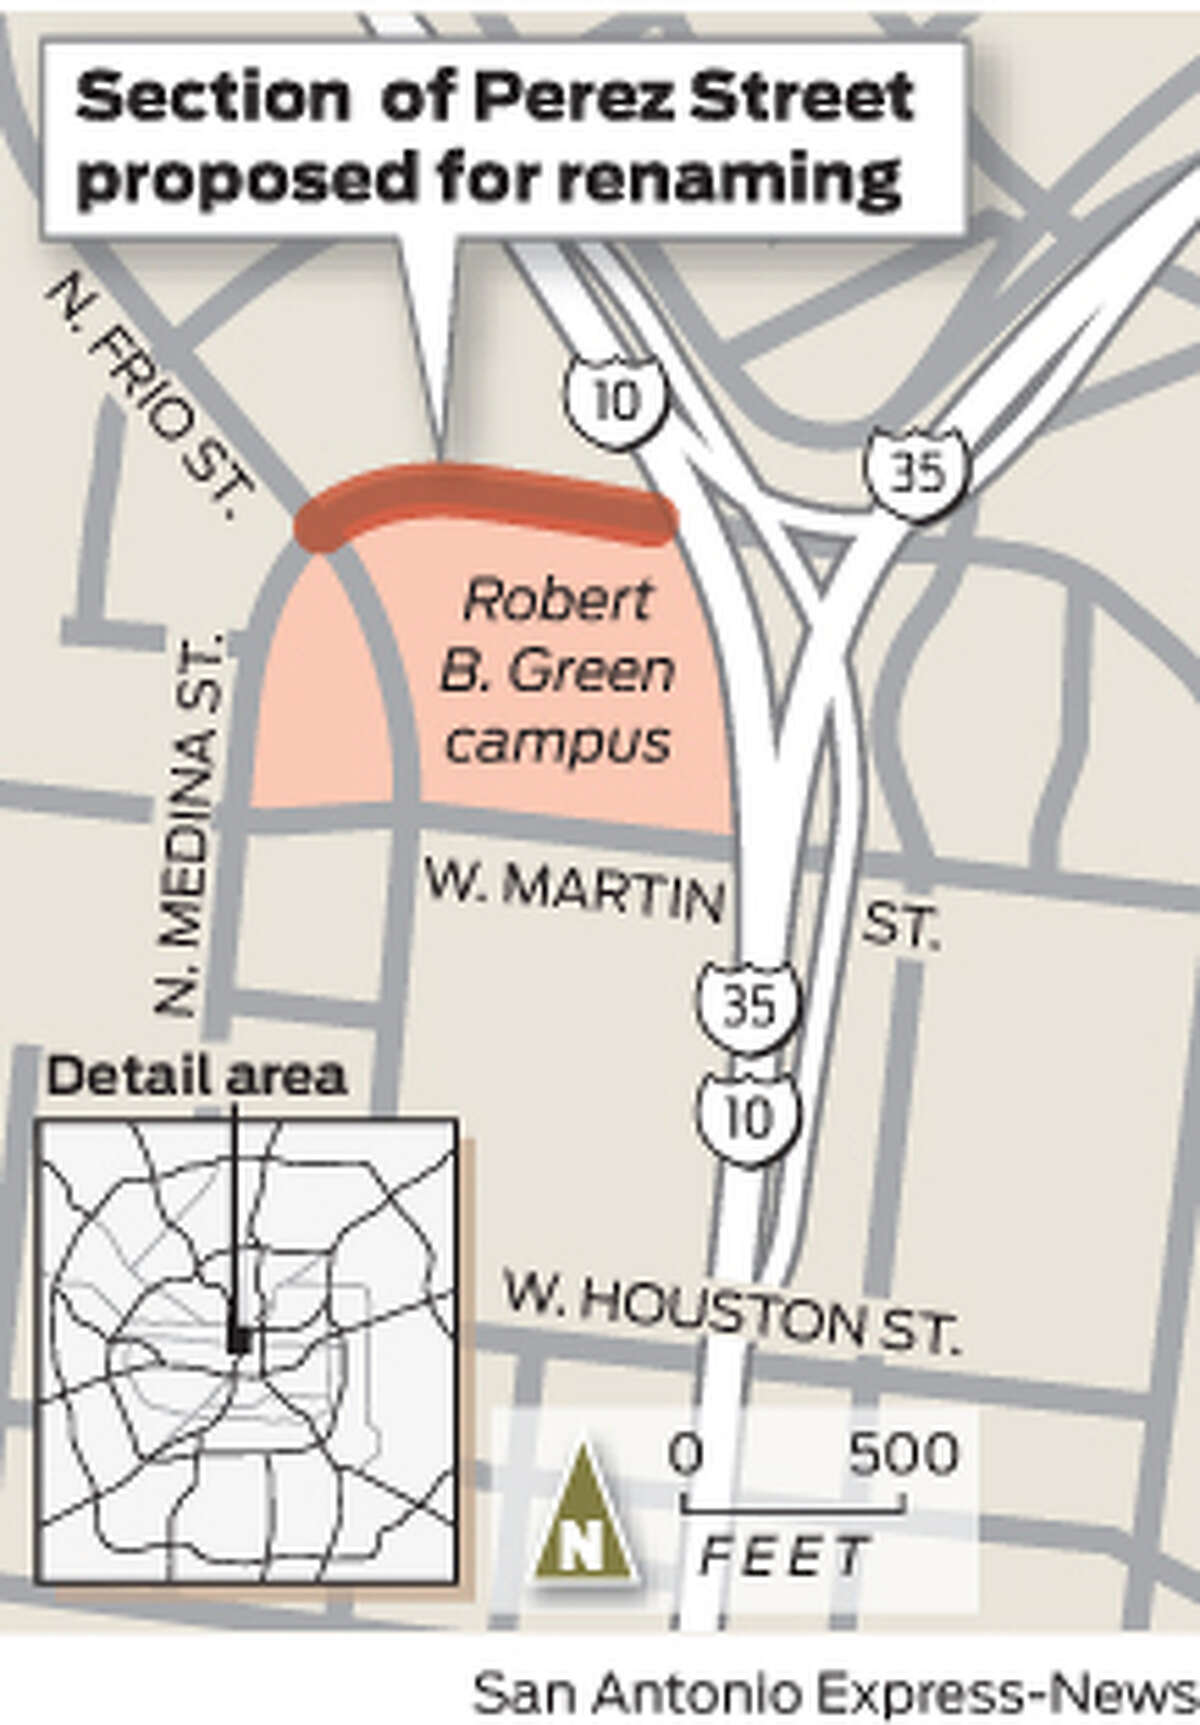 Section of Perez Street proposed for renaming.